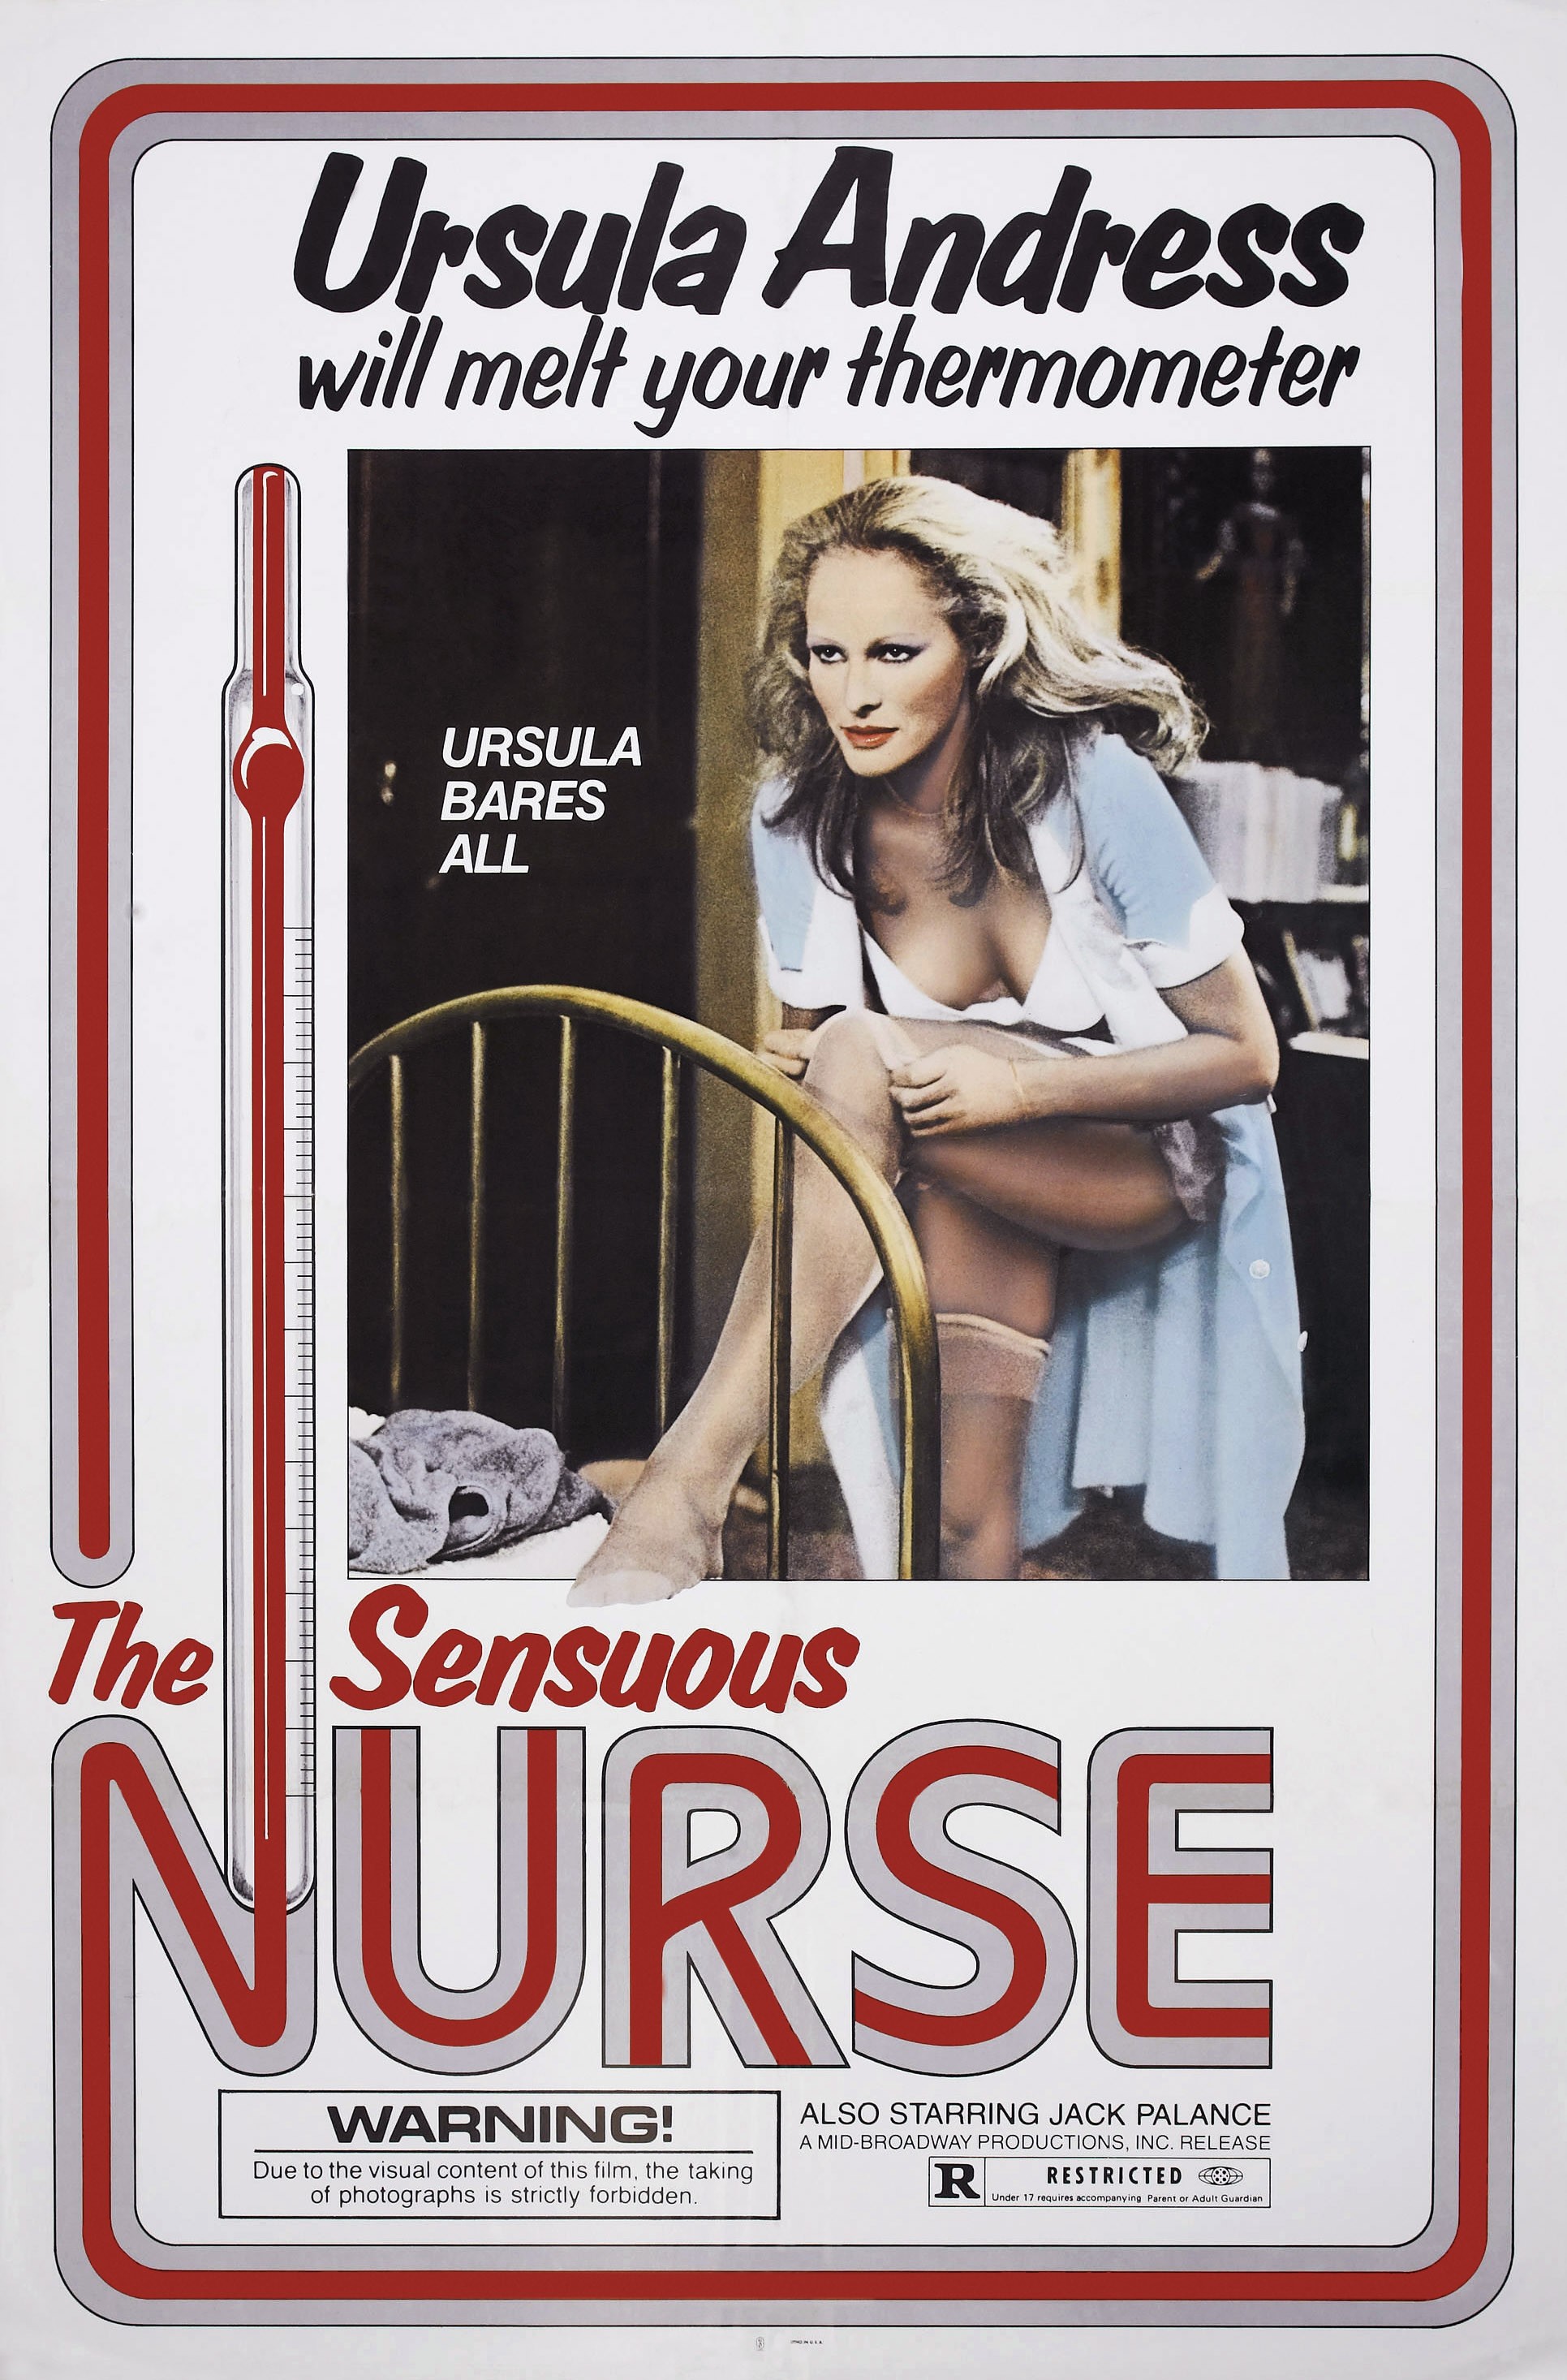 "The Sensuous Nurse," poster art of Ursula Andress, in 1975. | Source: Getty Images